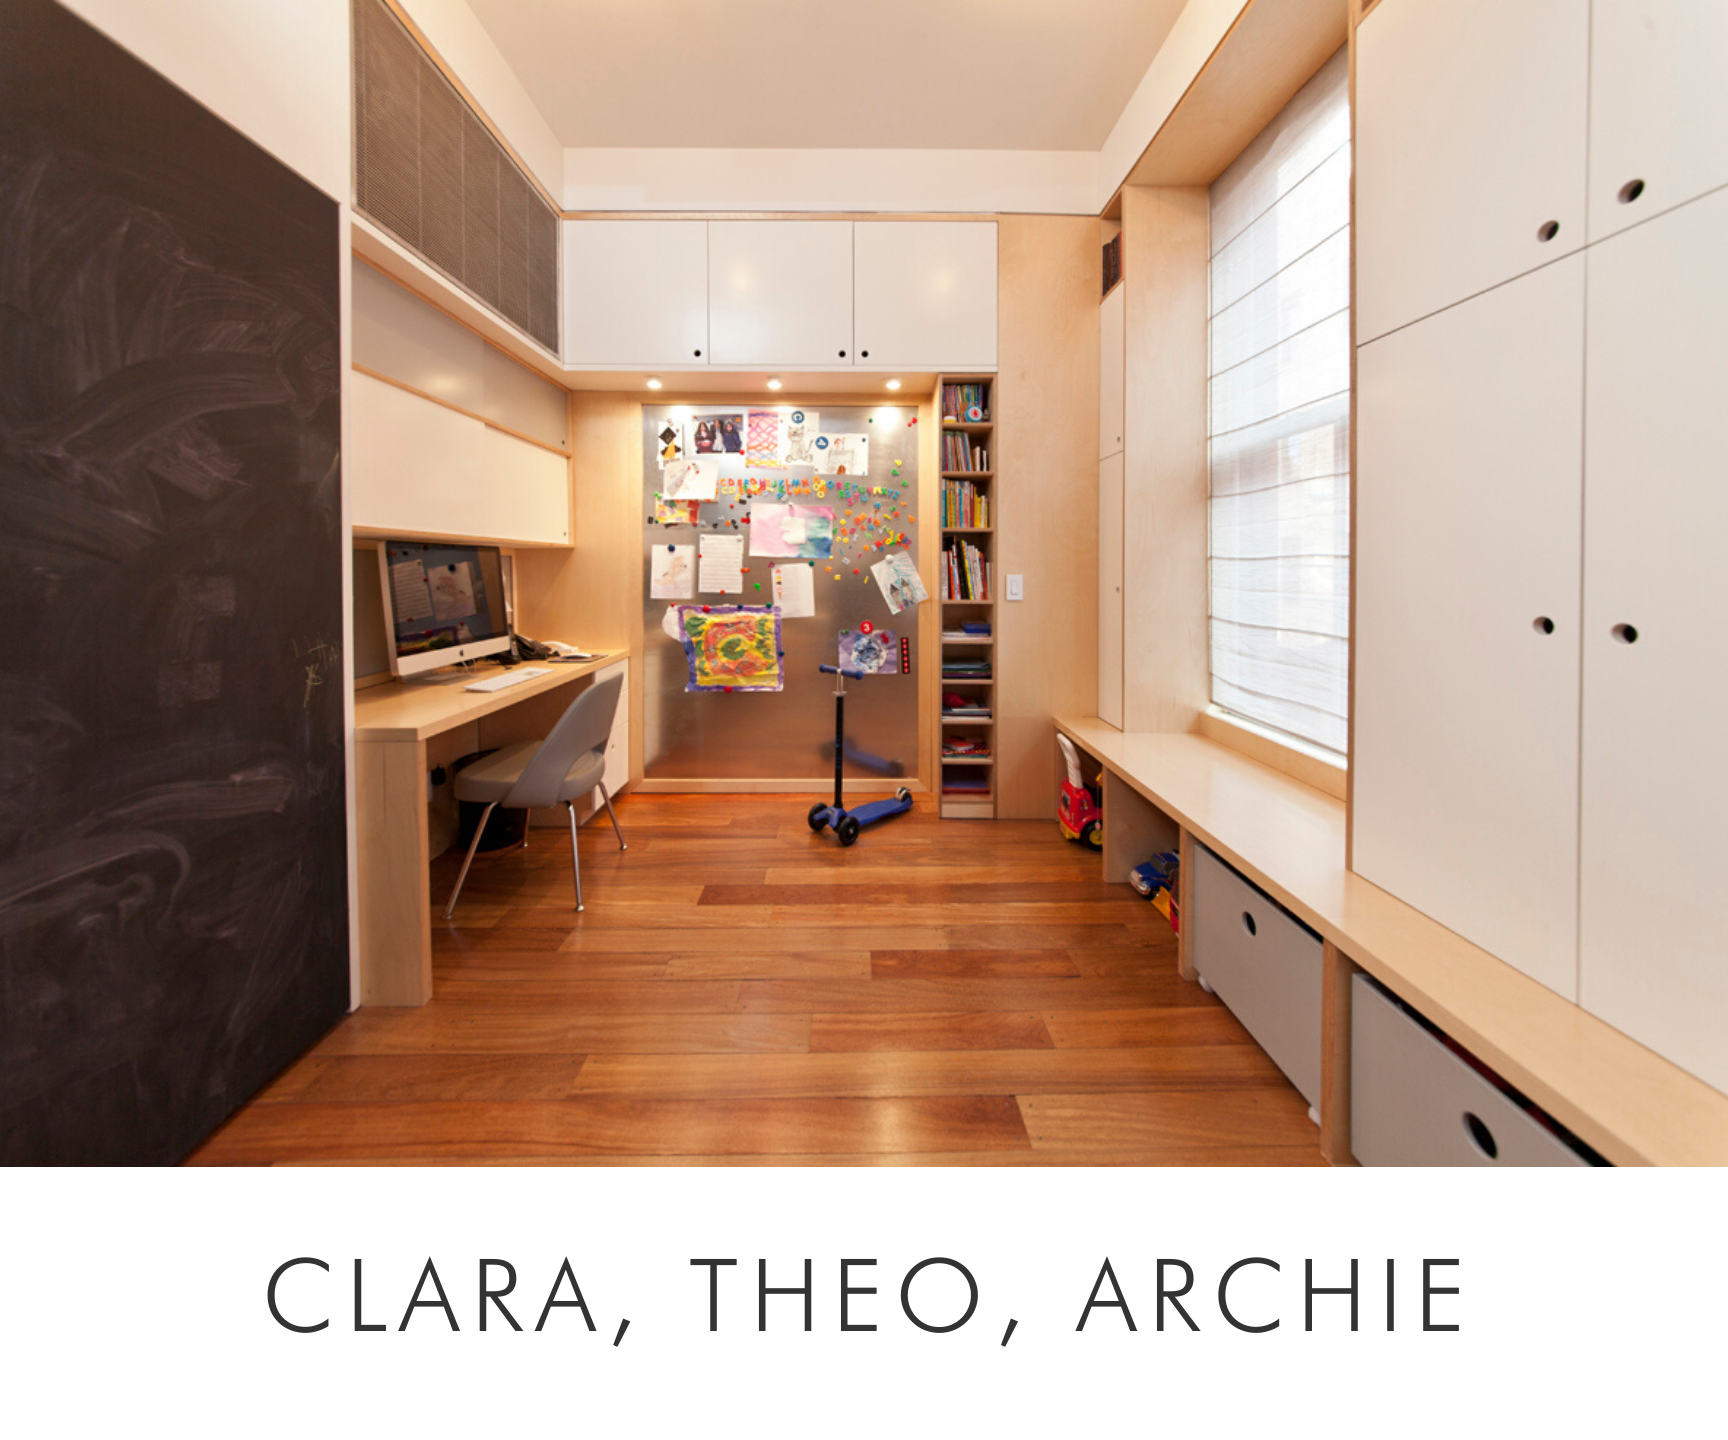 Clara , theo , archie thinviting study room with a desk, chalkboard wall, built-in storage, and large window with blinds.